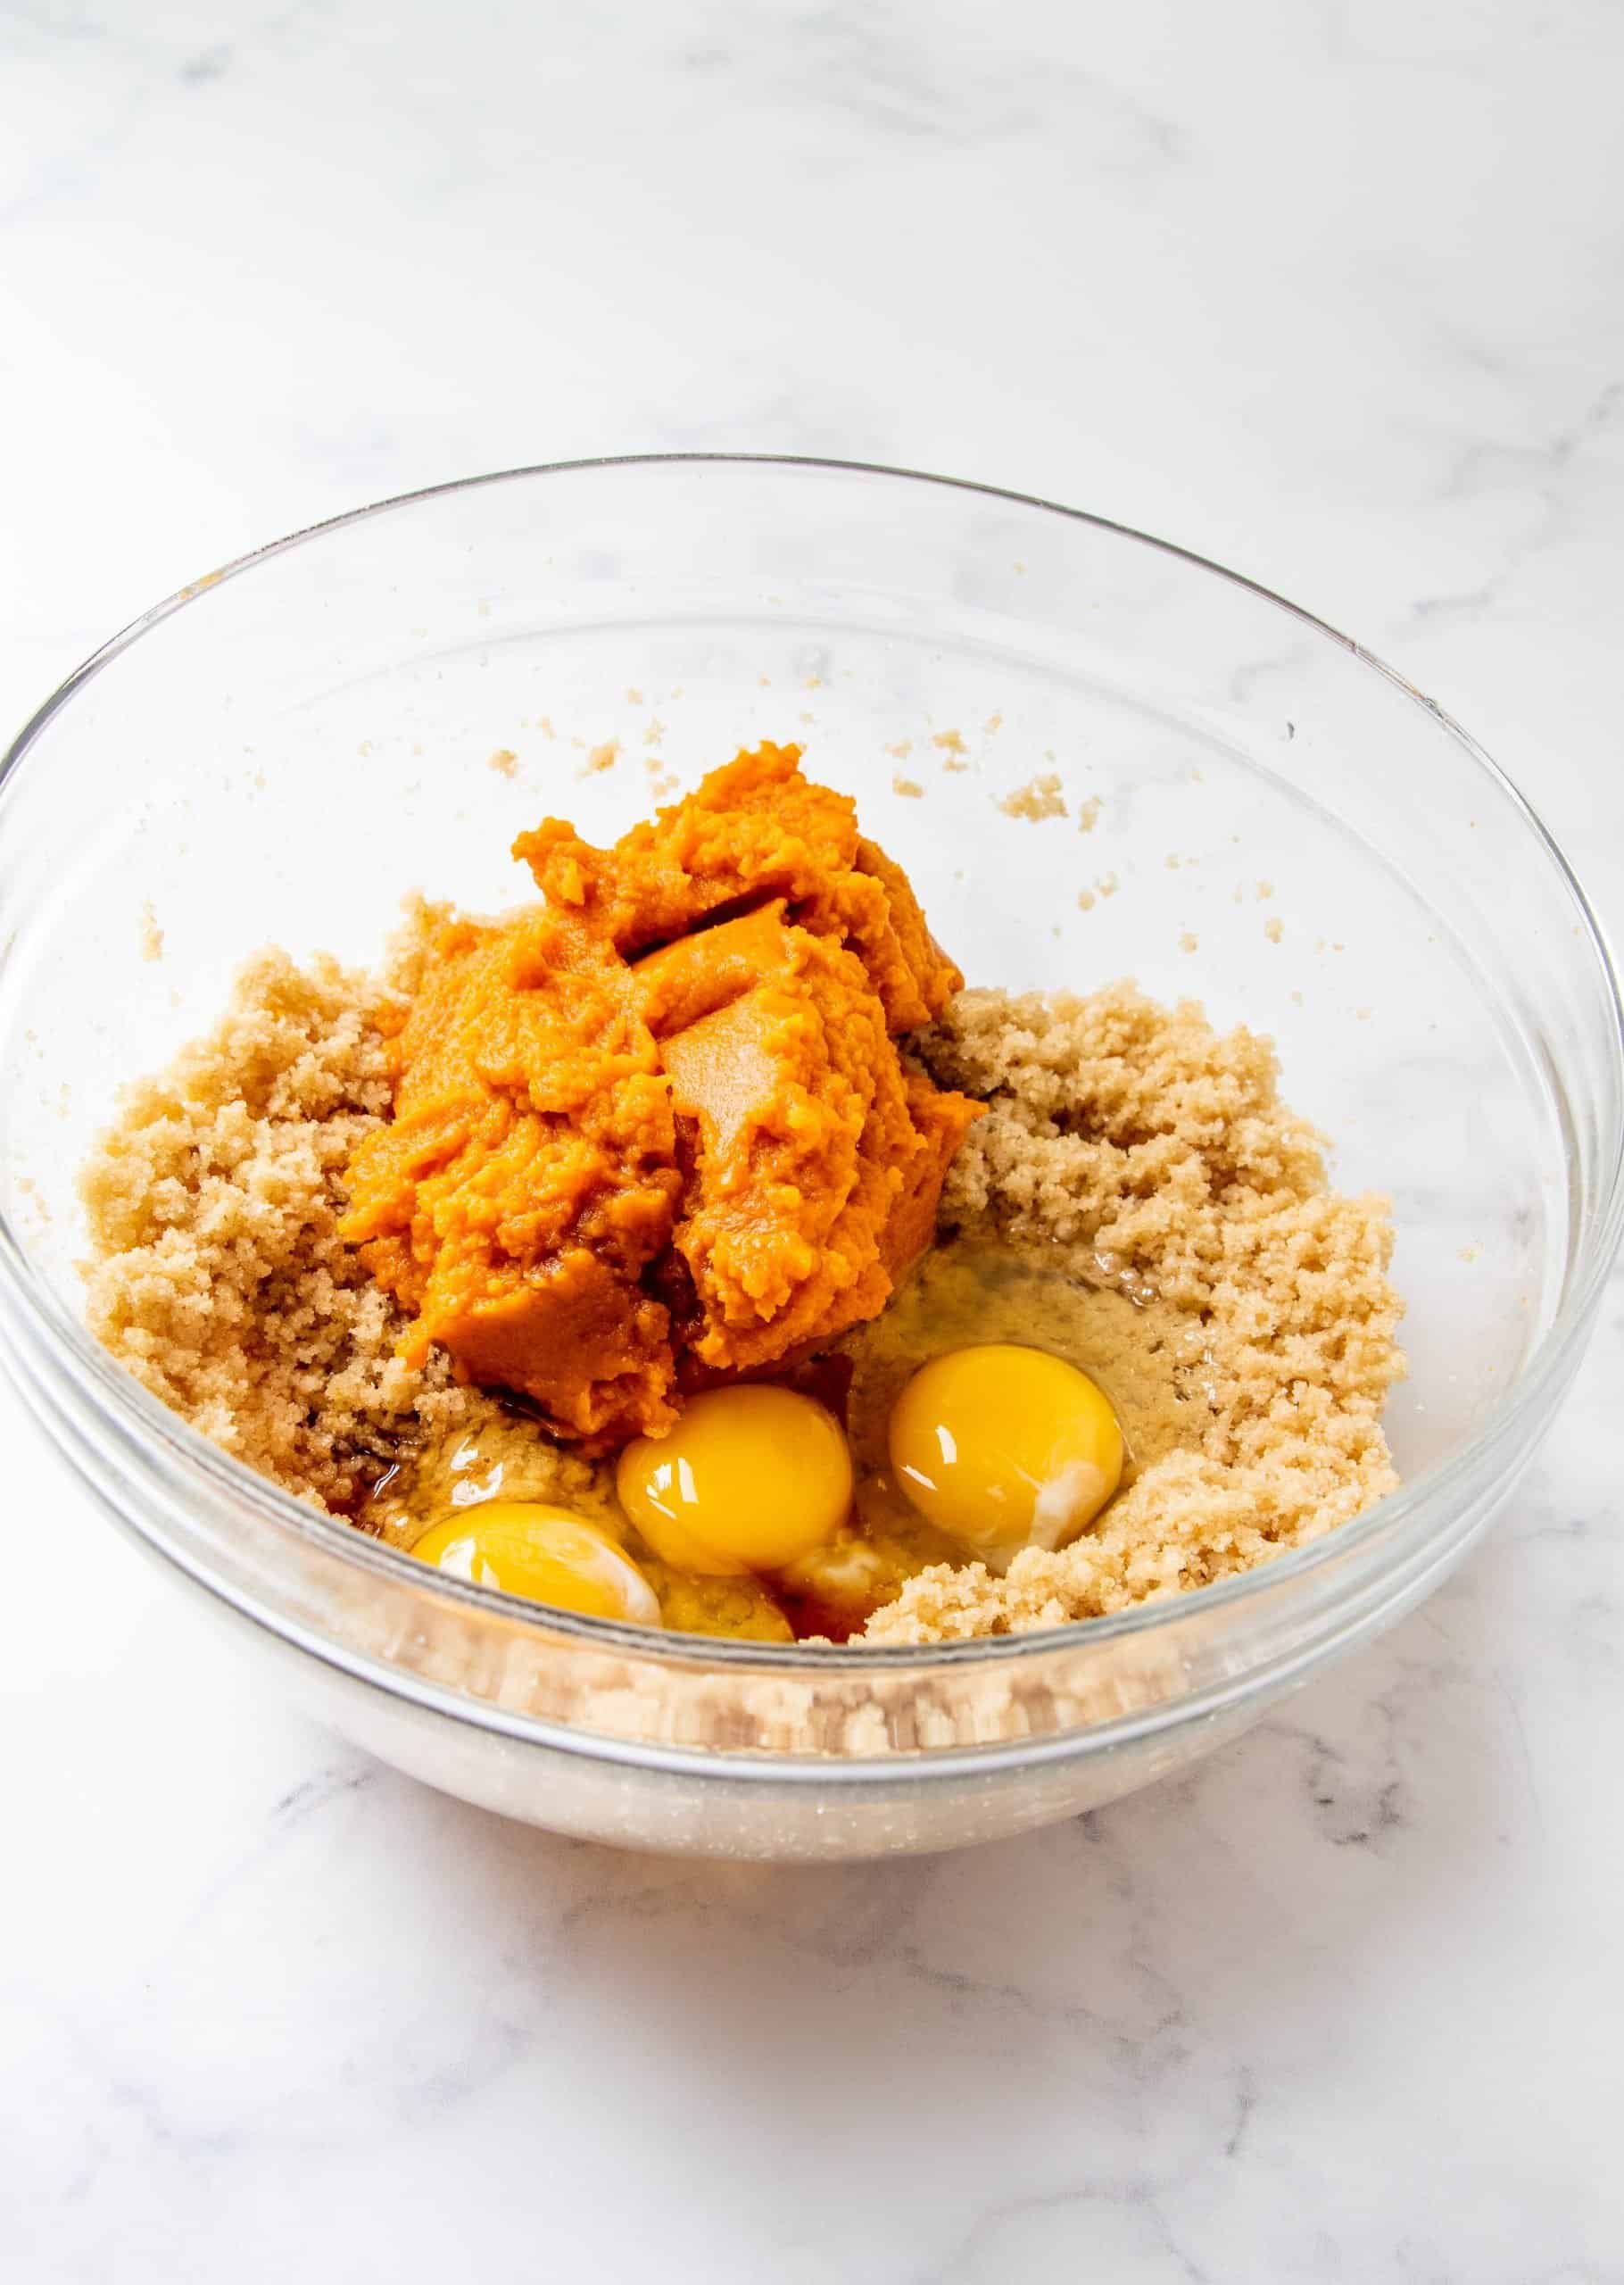 eggs and canned pumpkin added to butter and sugar mixture in a bowl.